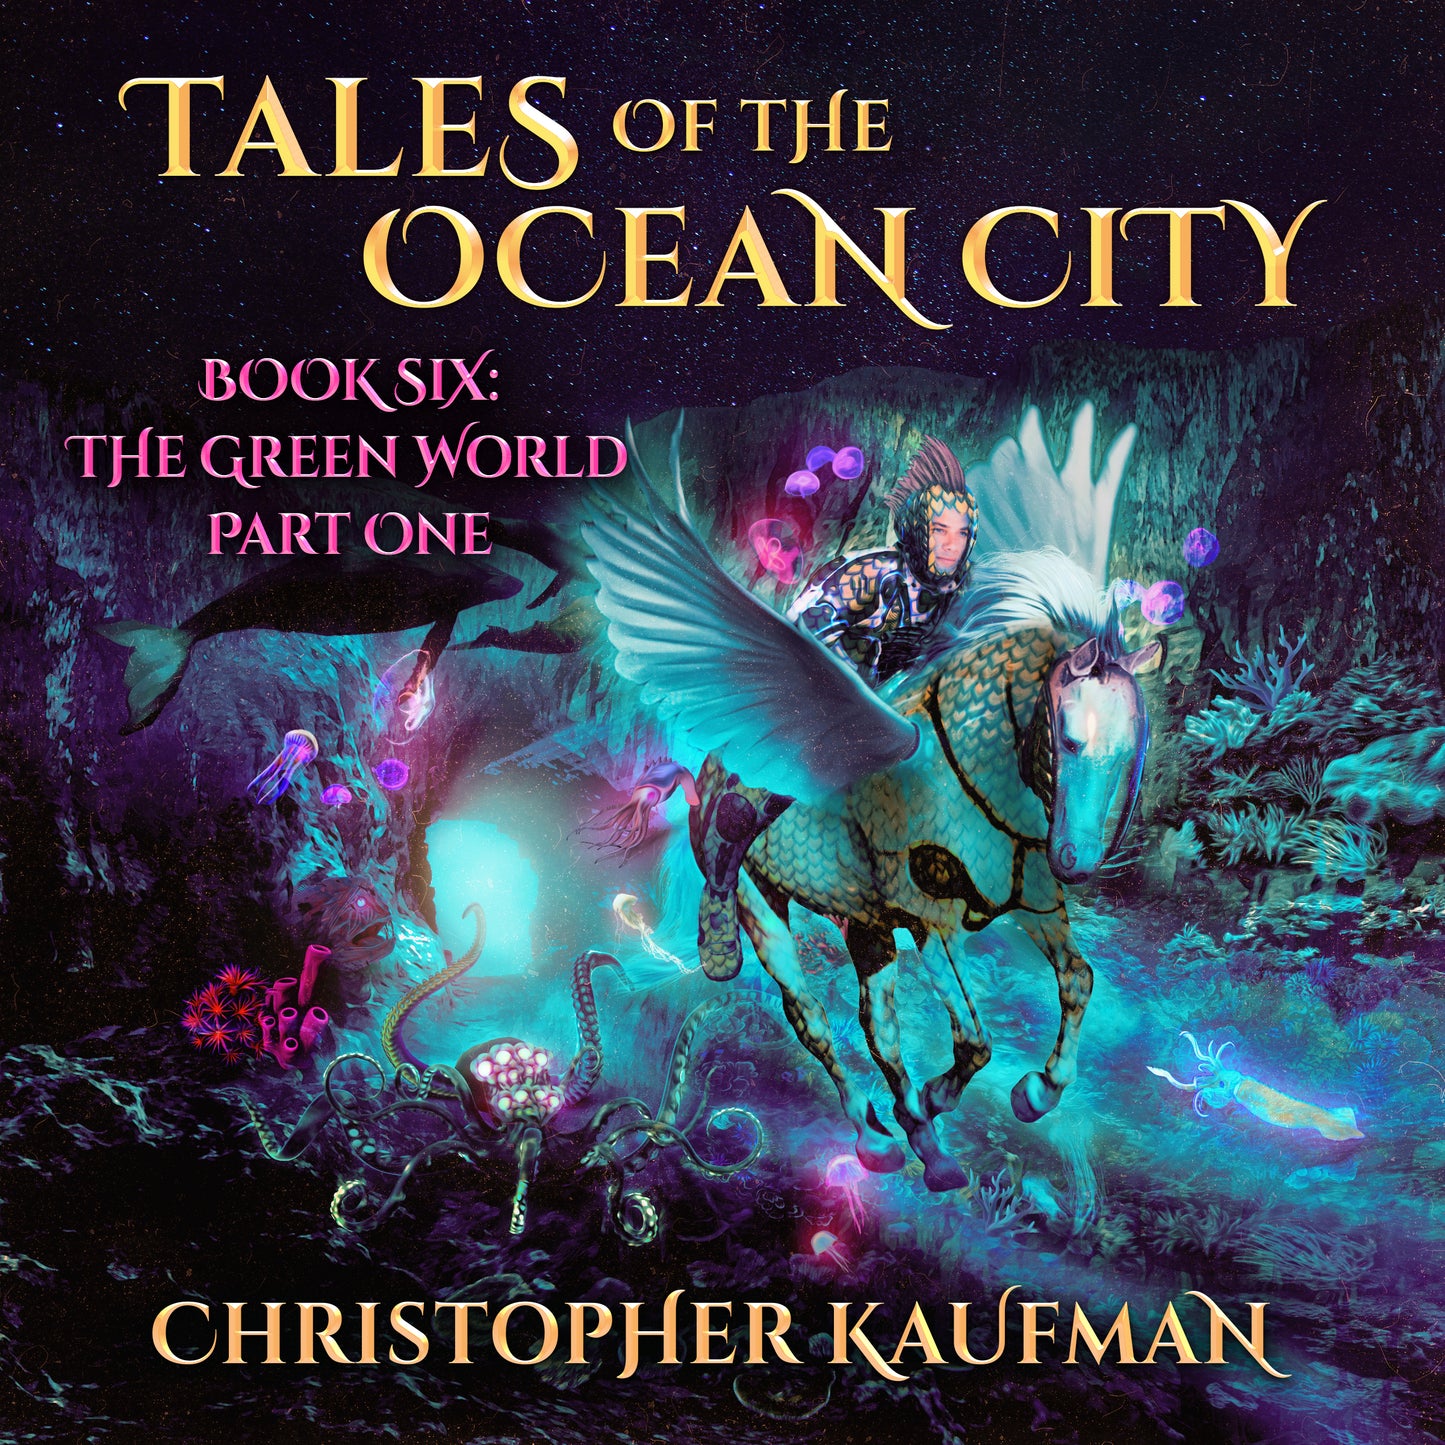 TALES OF THE OCEAN CITY : Book Six : The Green World Part One